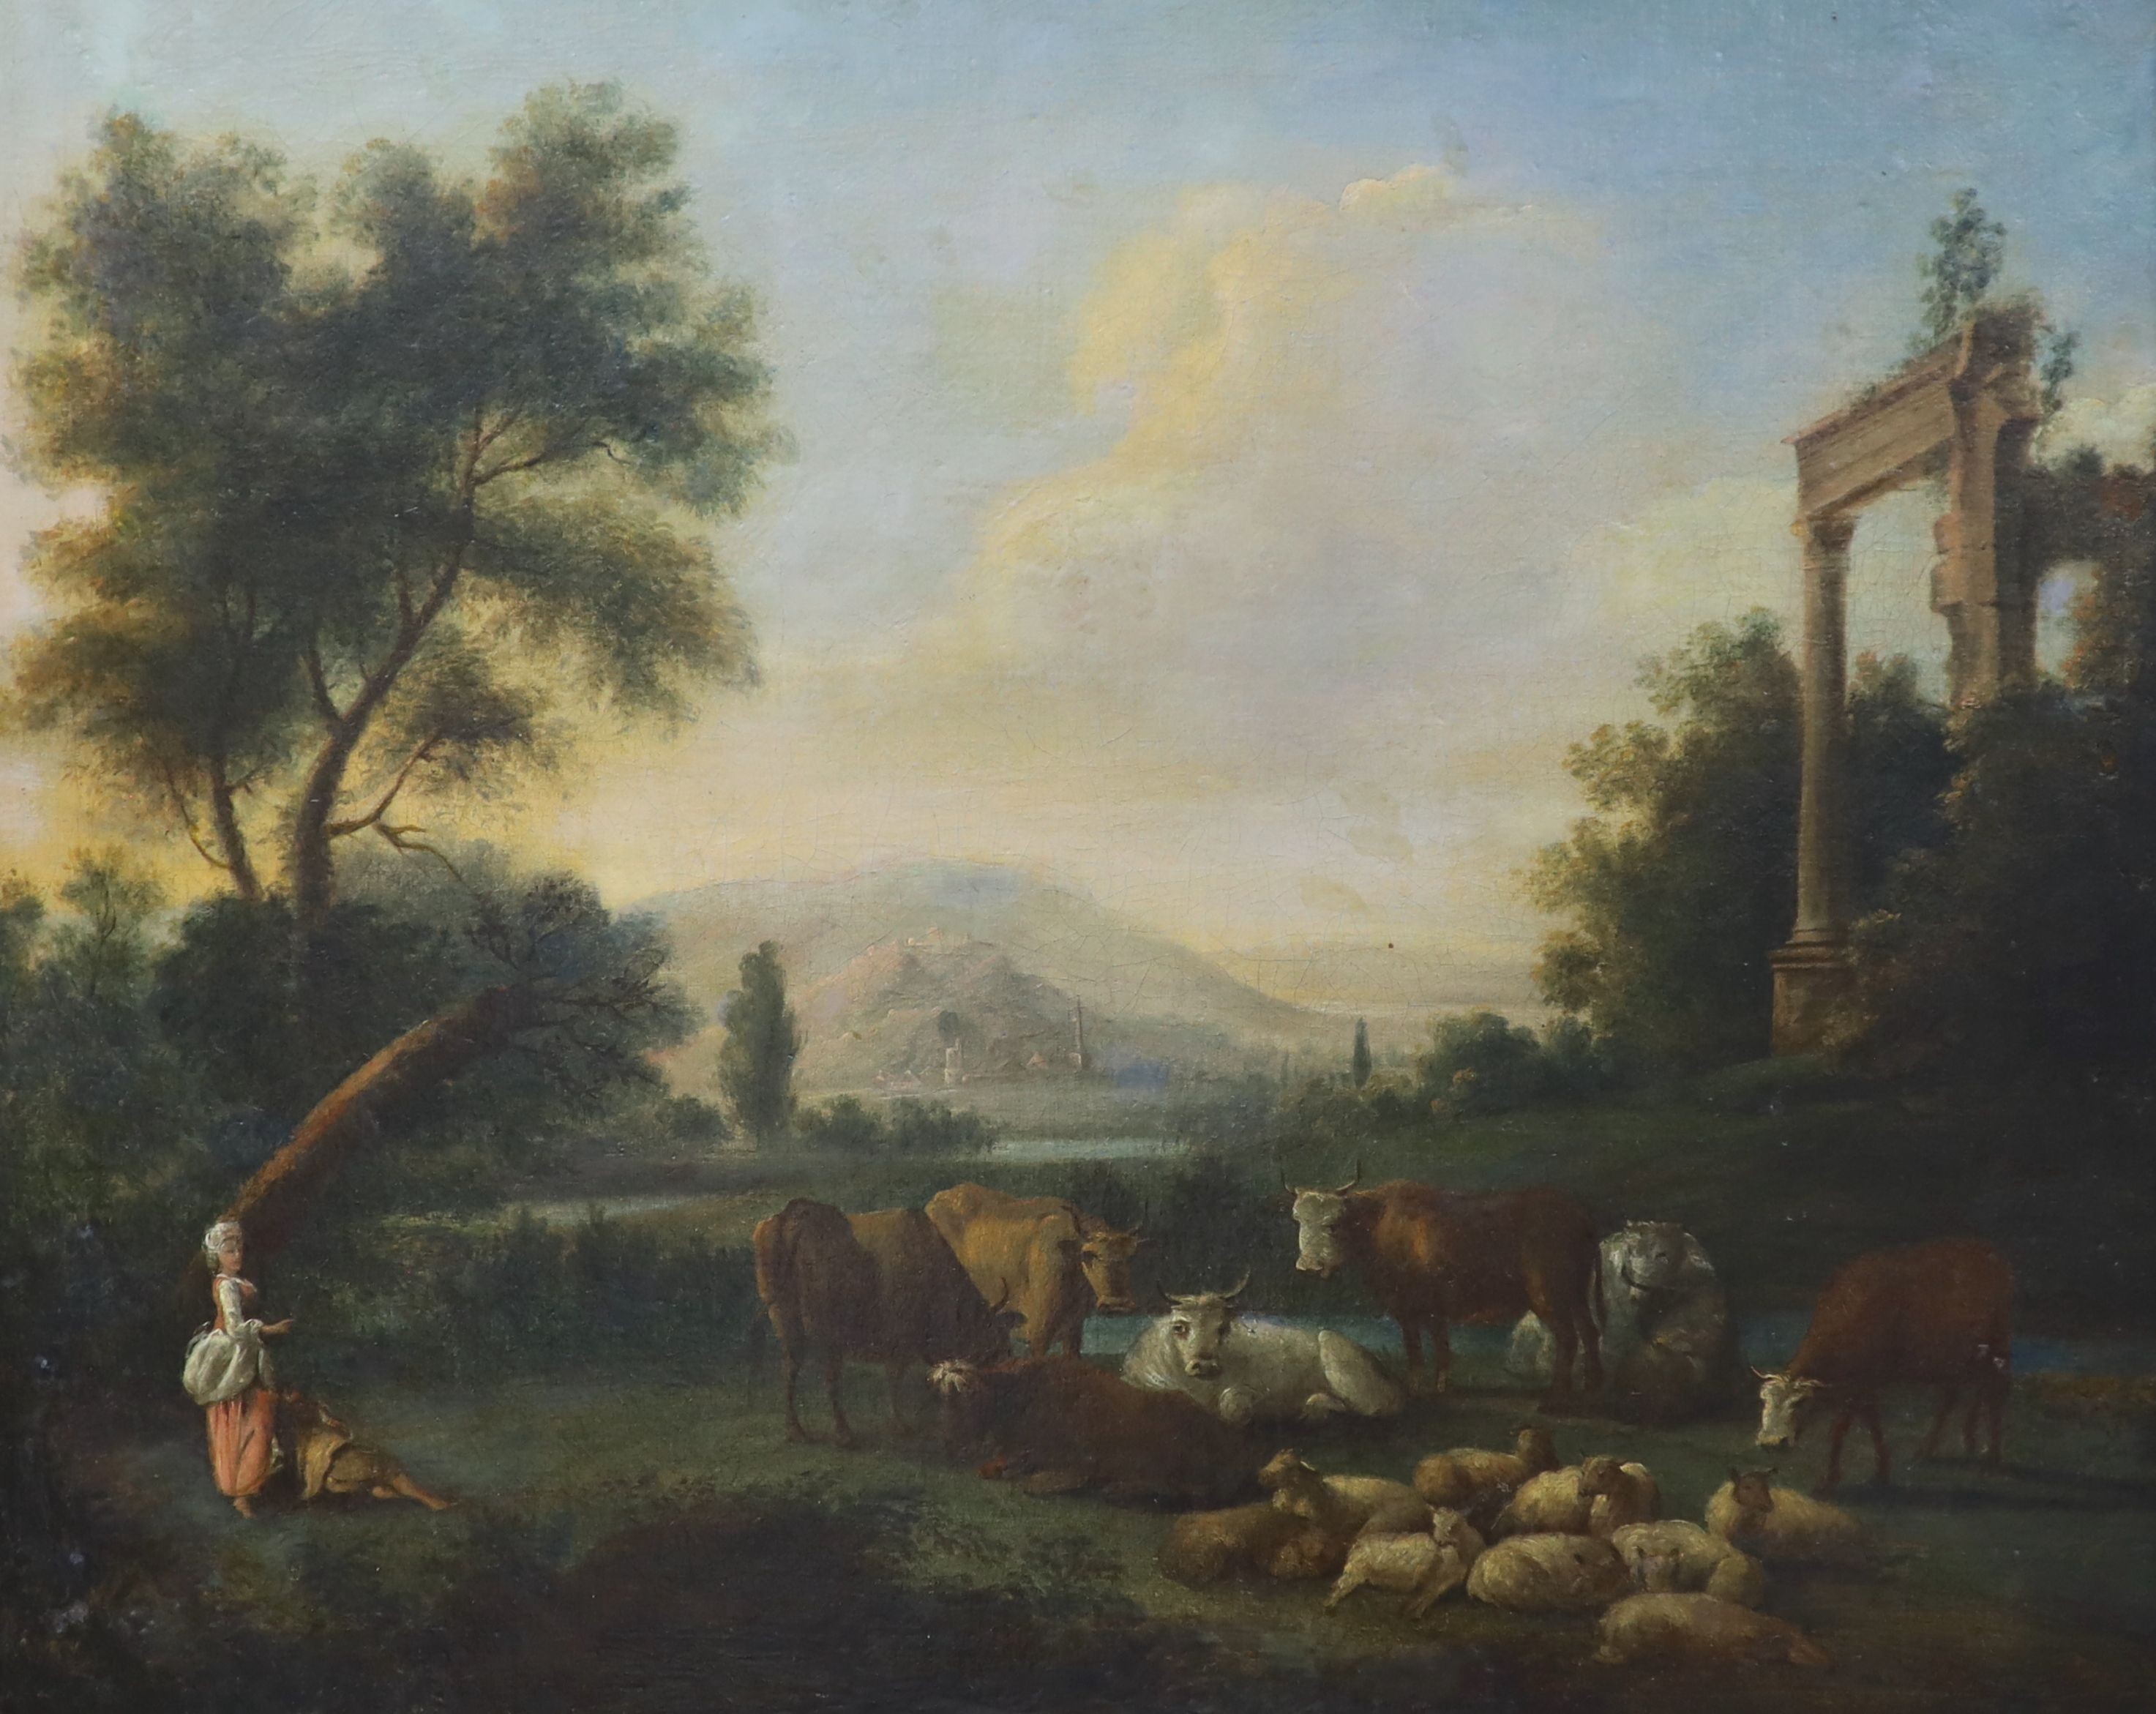 Early 19th century Continental School, oil on canvas, Cattle drover and shepherdess at rest in a classical landscape, 60 x 73cm